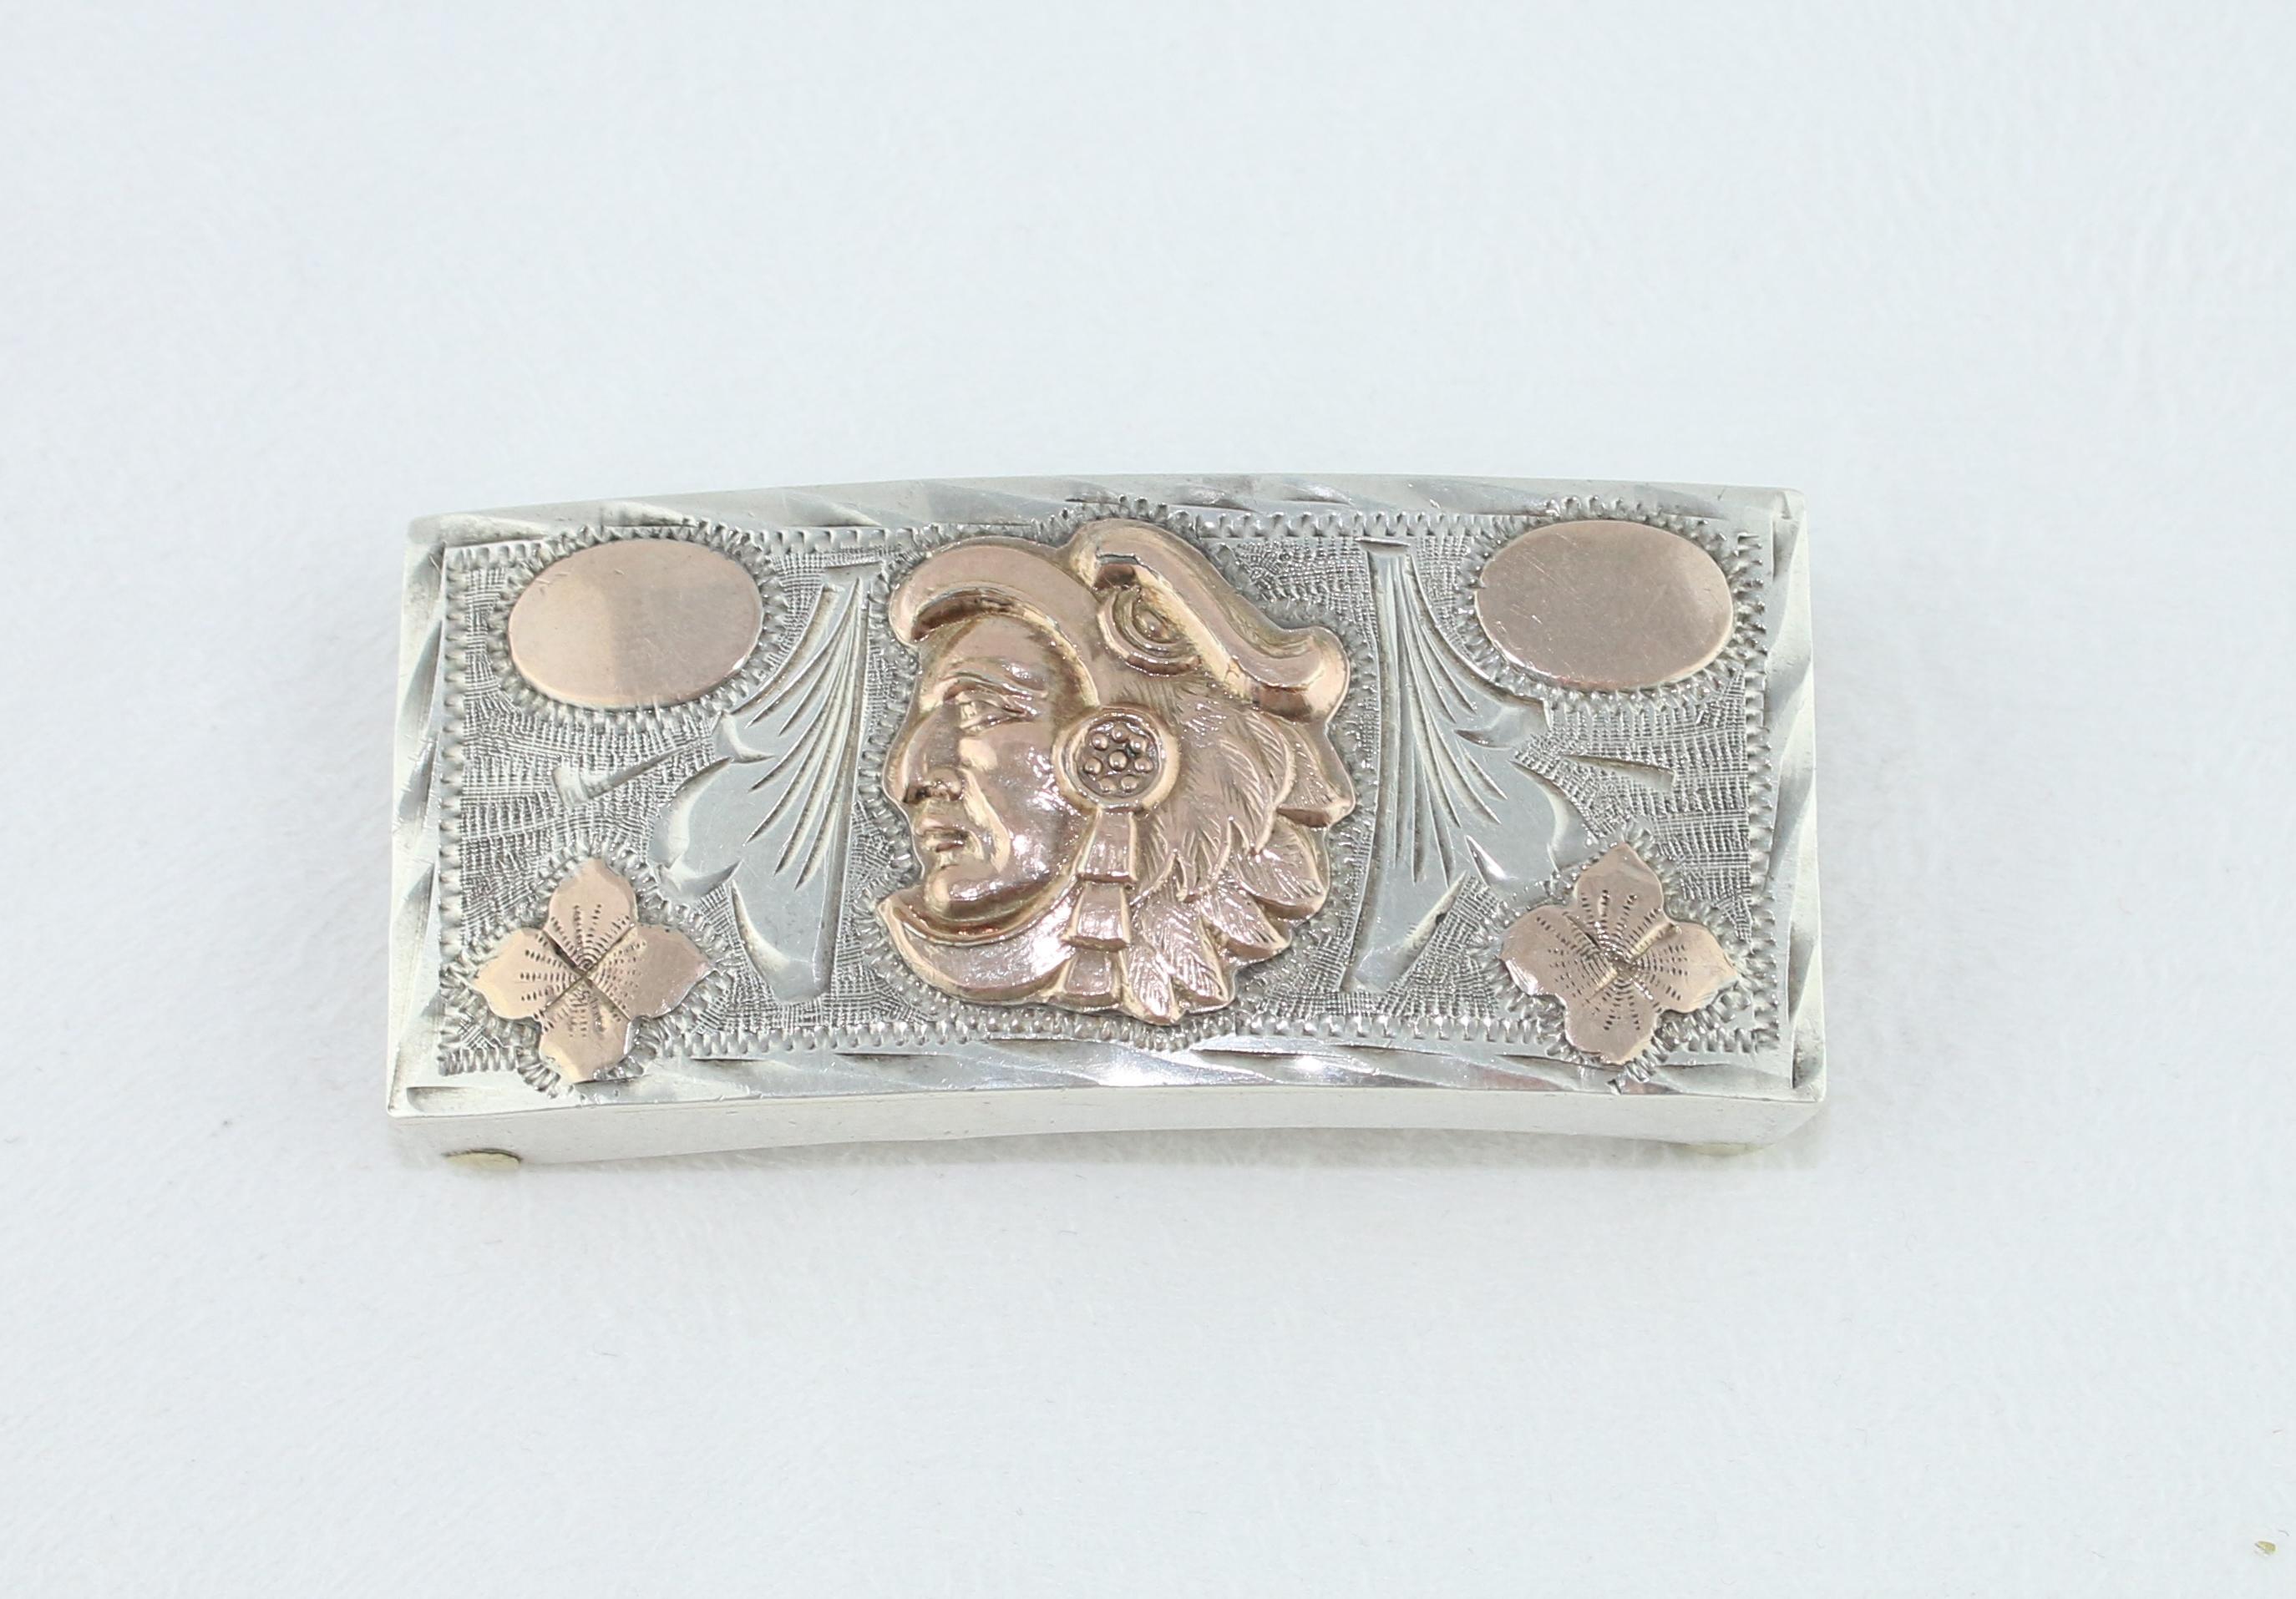 Beautiful Mayan Imagery Belt Buckle
The Belt Buckle is from Guadalajara Mexico by JCL
The buckle is Sterling Silver and 10K Rose Gold
The buckle measures 2.25